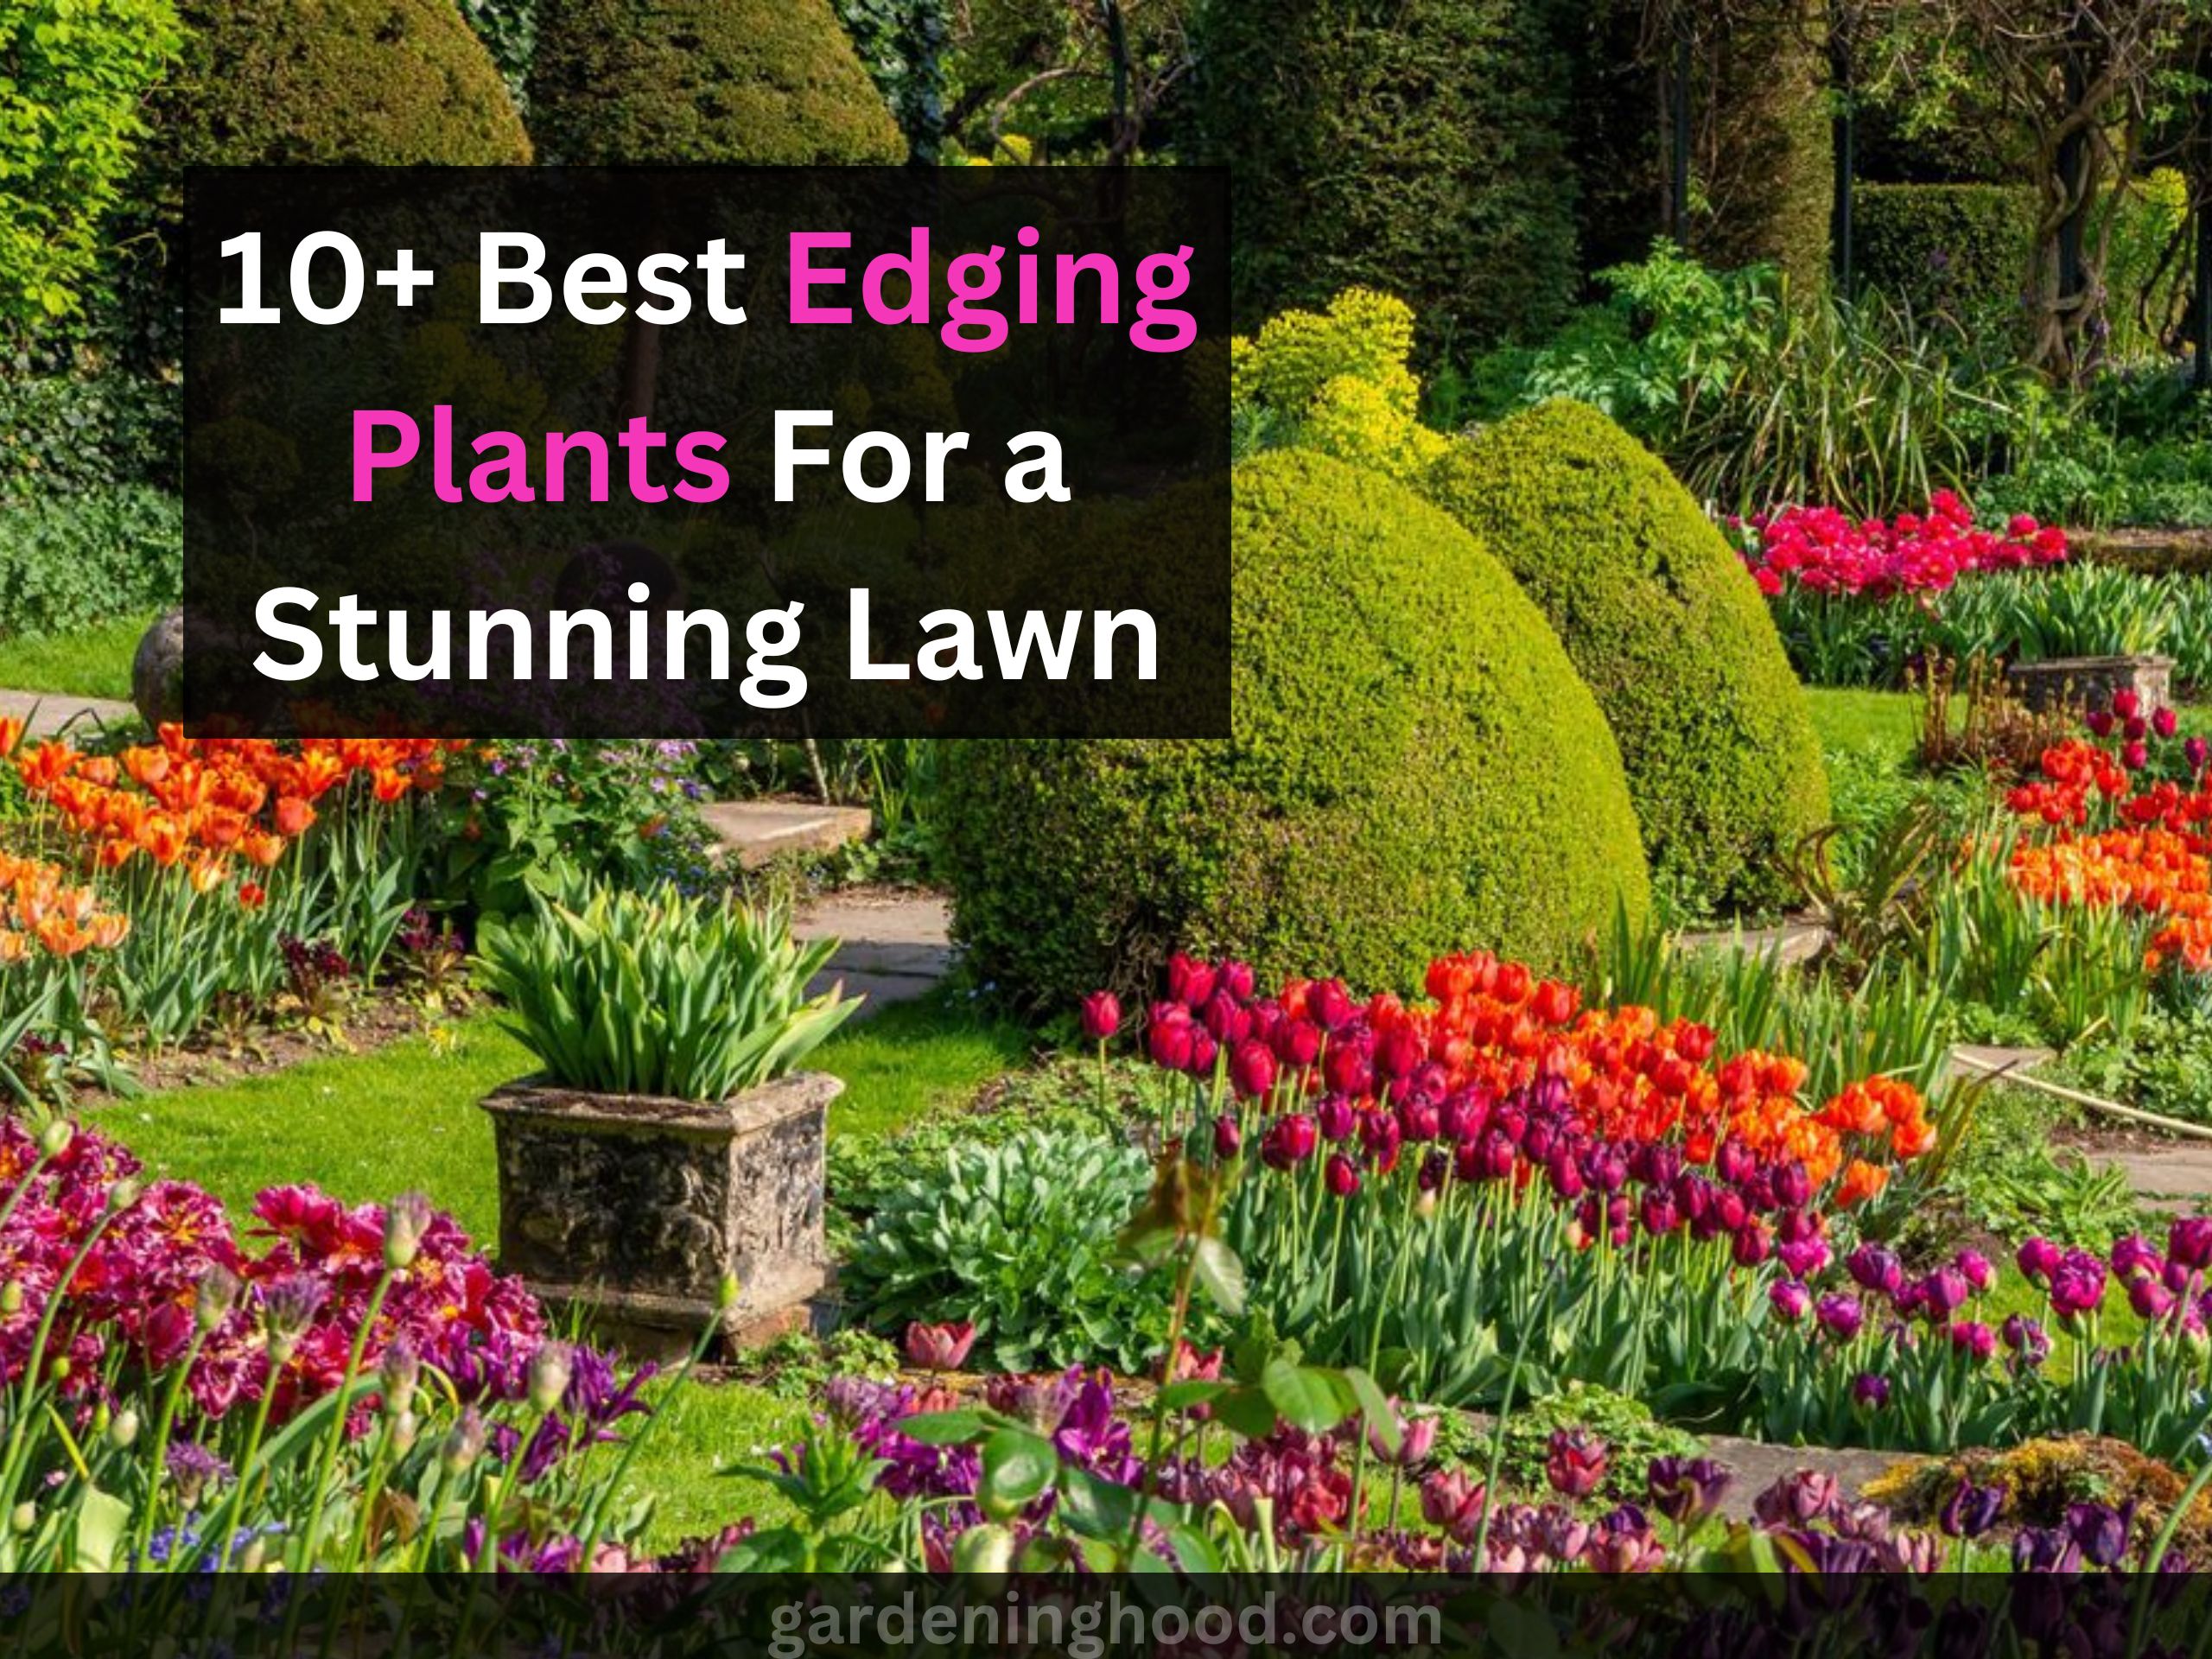 Best Edging Plants For a Stunning Lawn